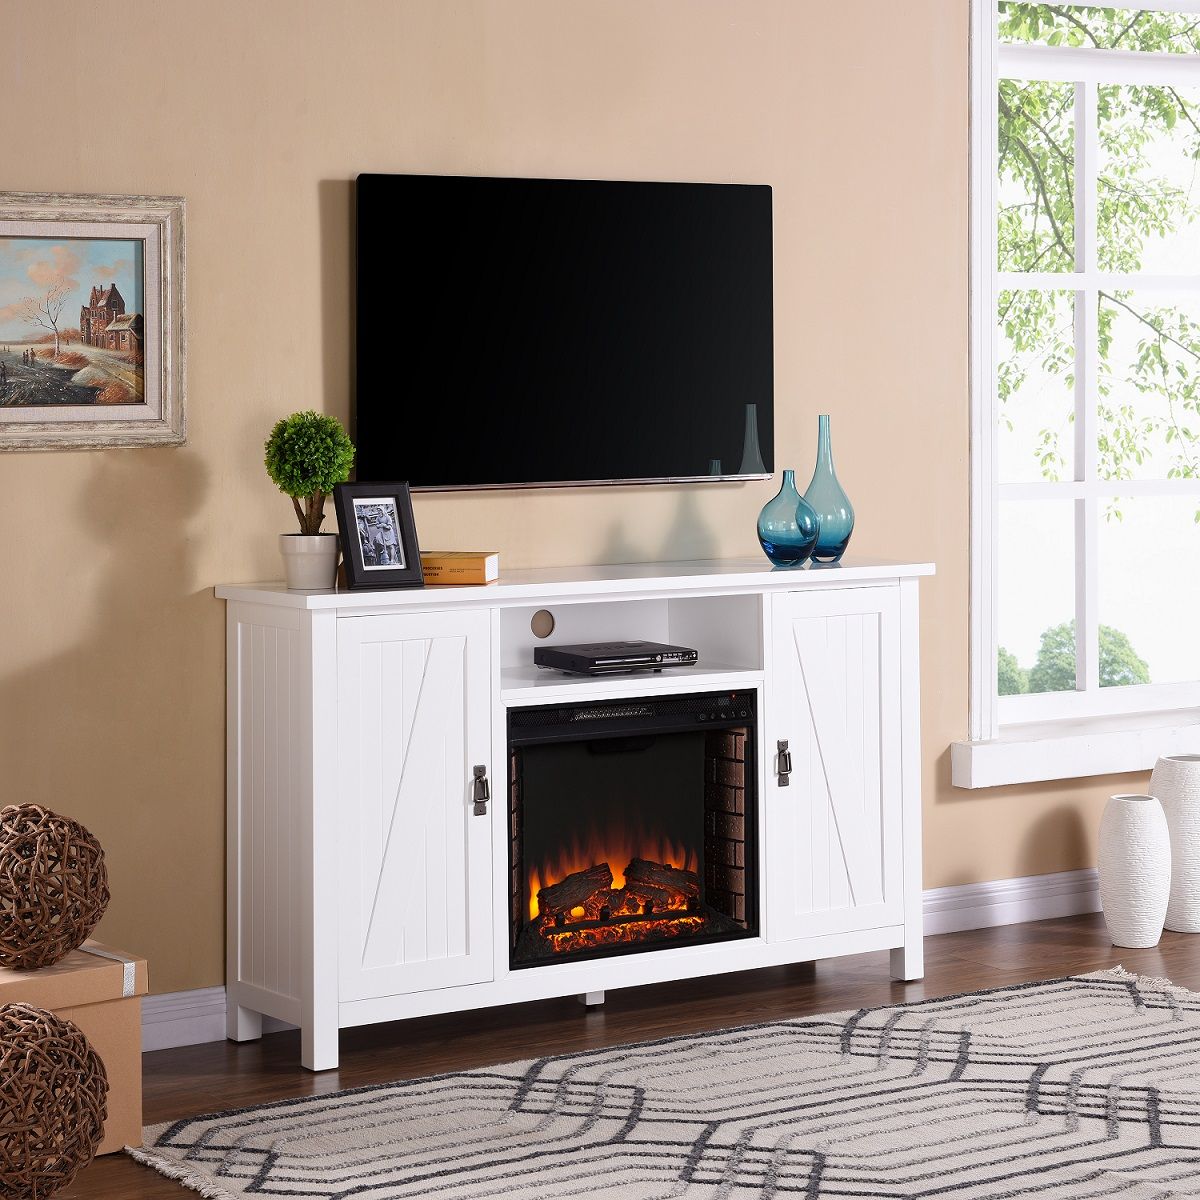 58" Adderly Farmhouse Style Electric Fireplace Tv Stand Intended For White Tall Tv Stands (View 7 of 15)